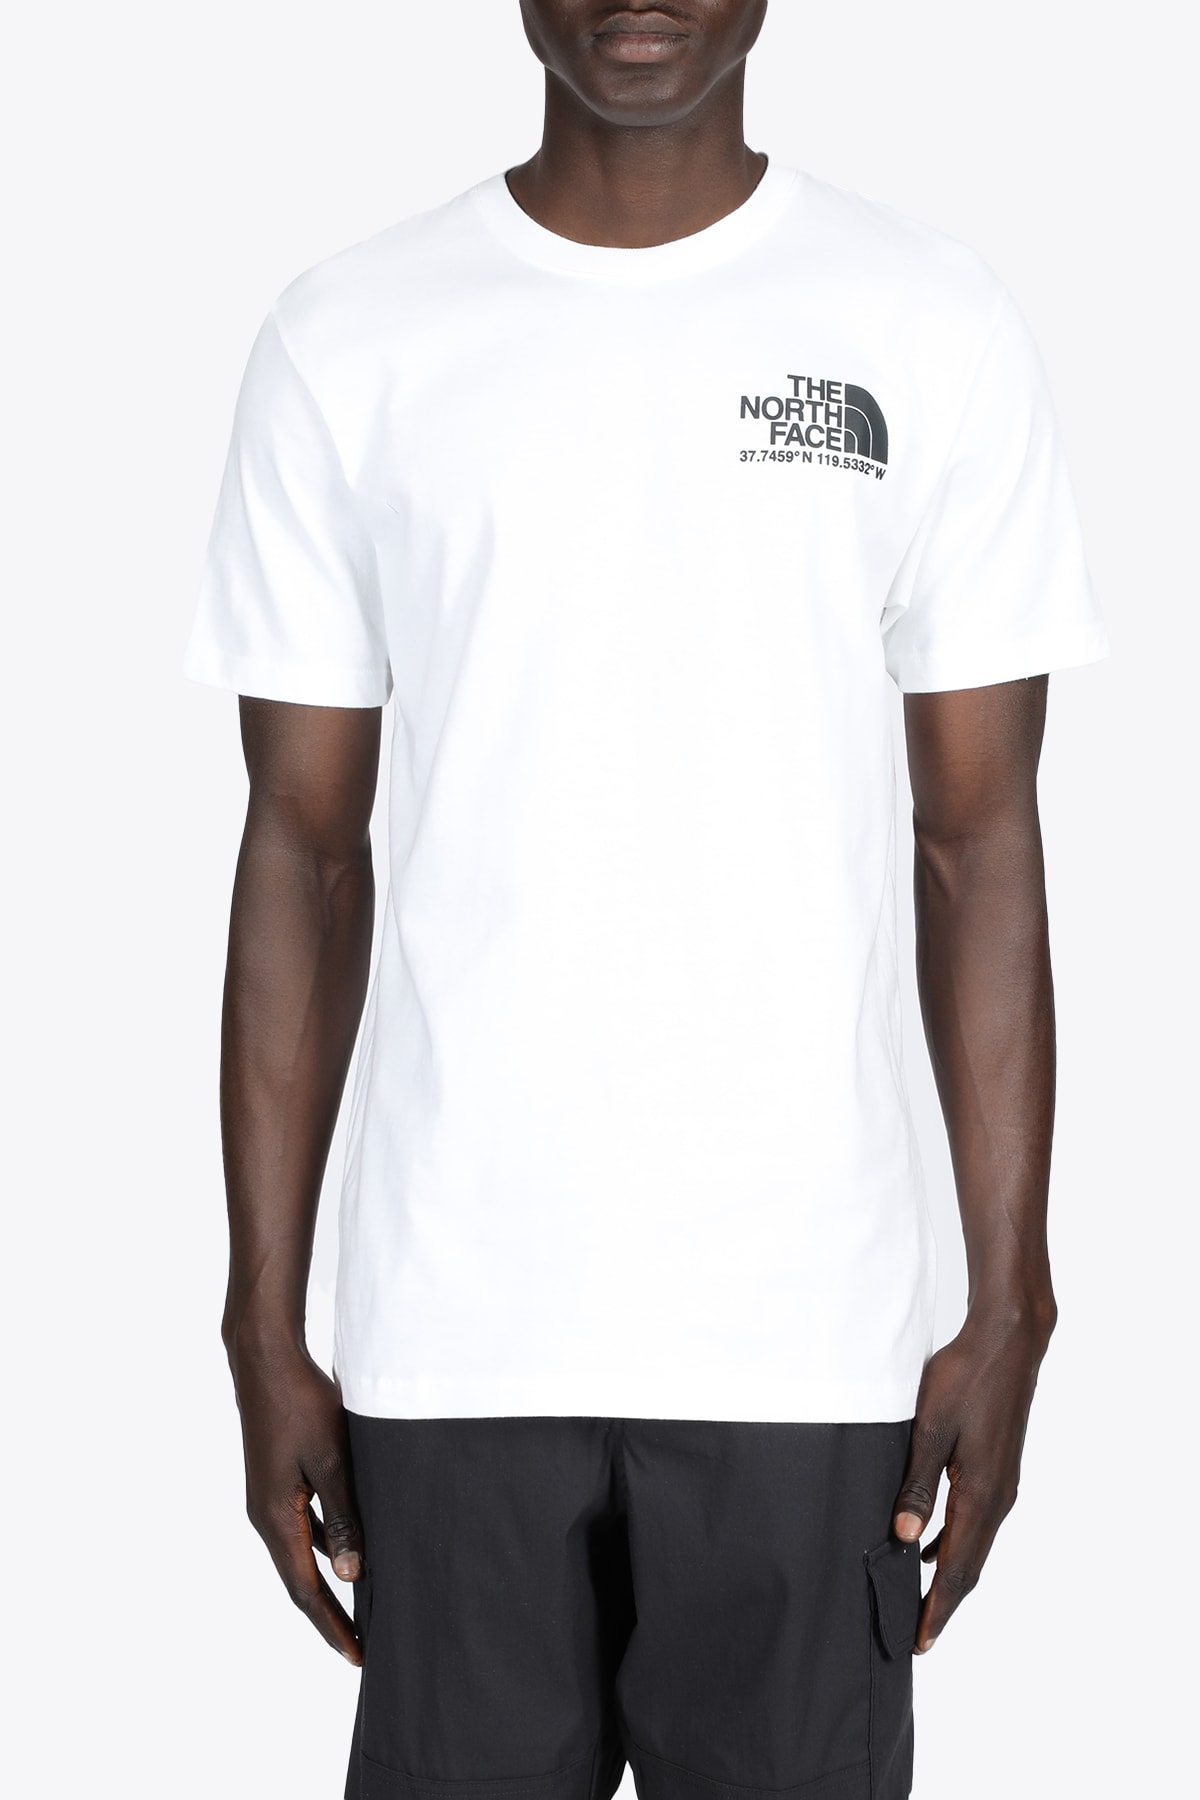 The North Face Coordinates S/s Tee